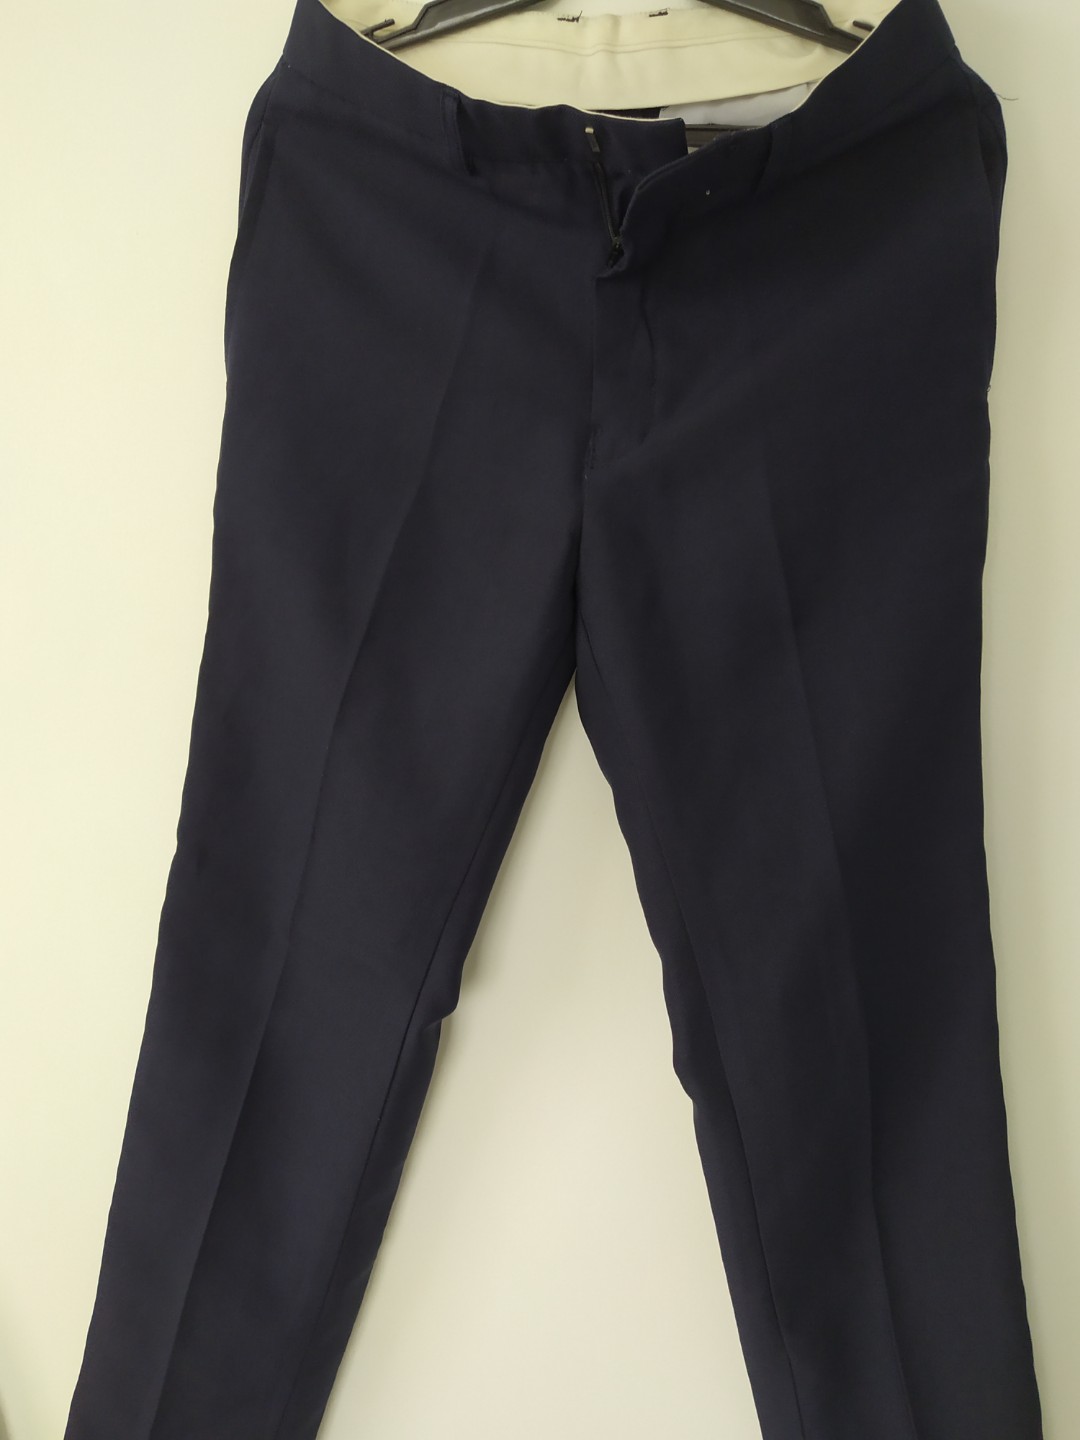 Navy Blue pants for school or office, Women's Fashion, Bottoms, Other ...